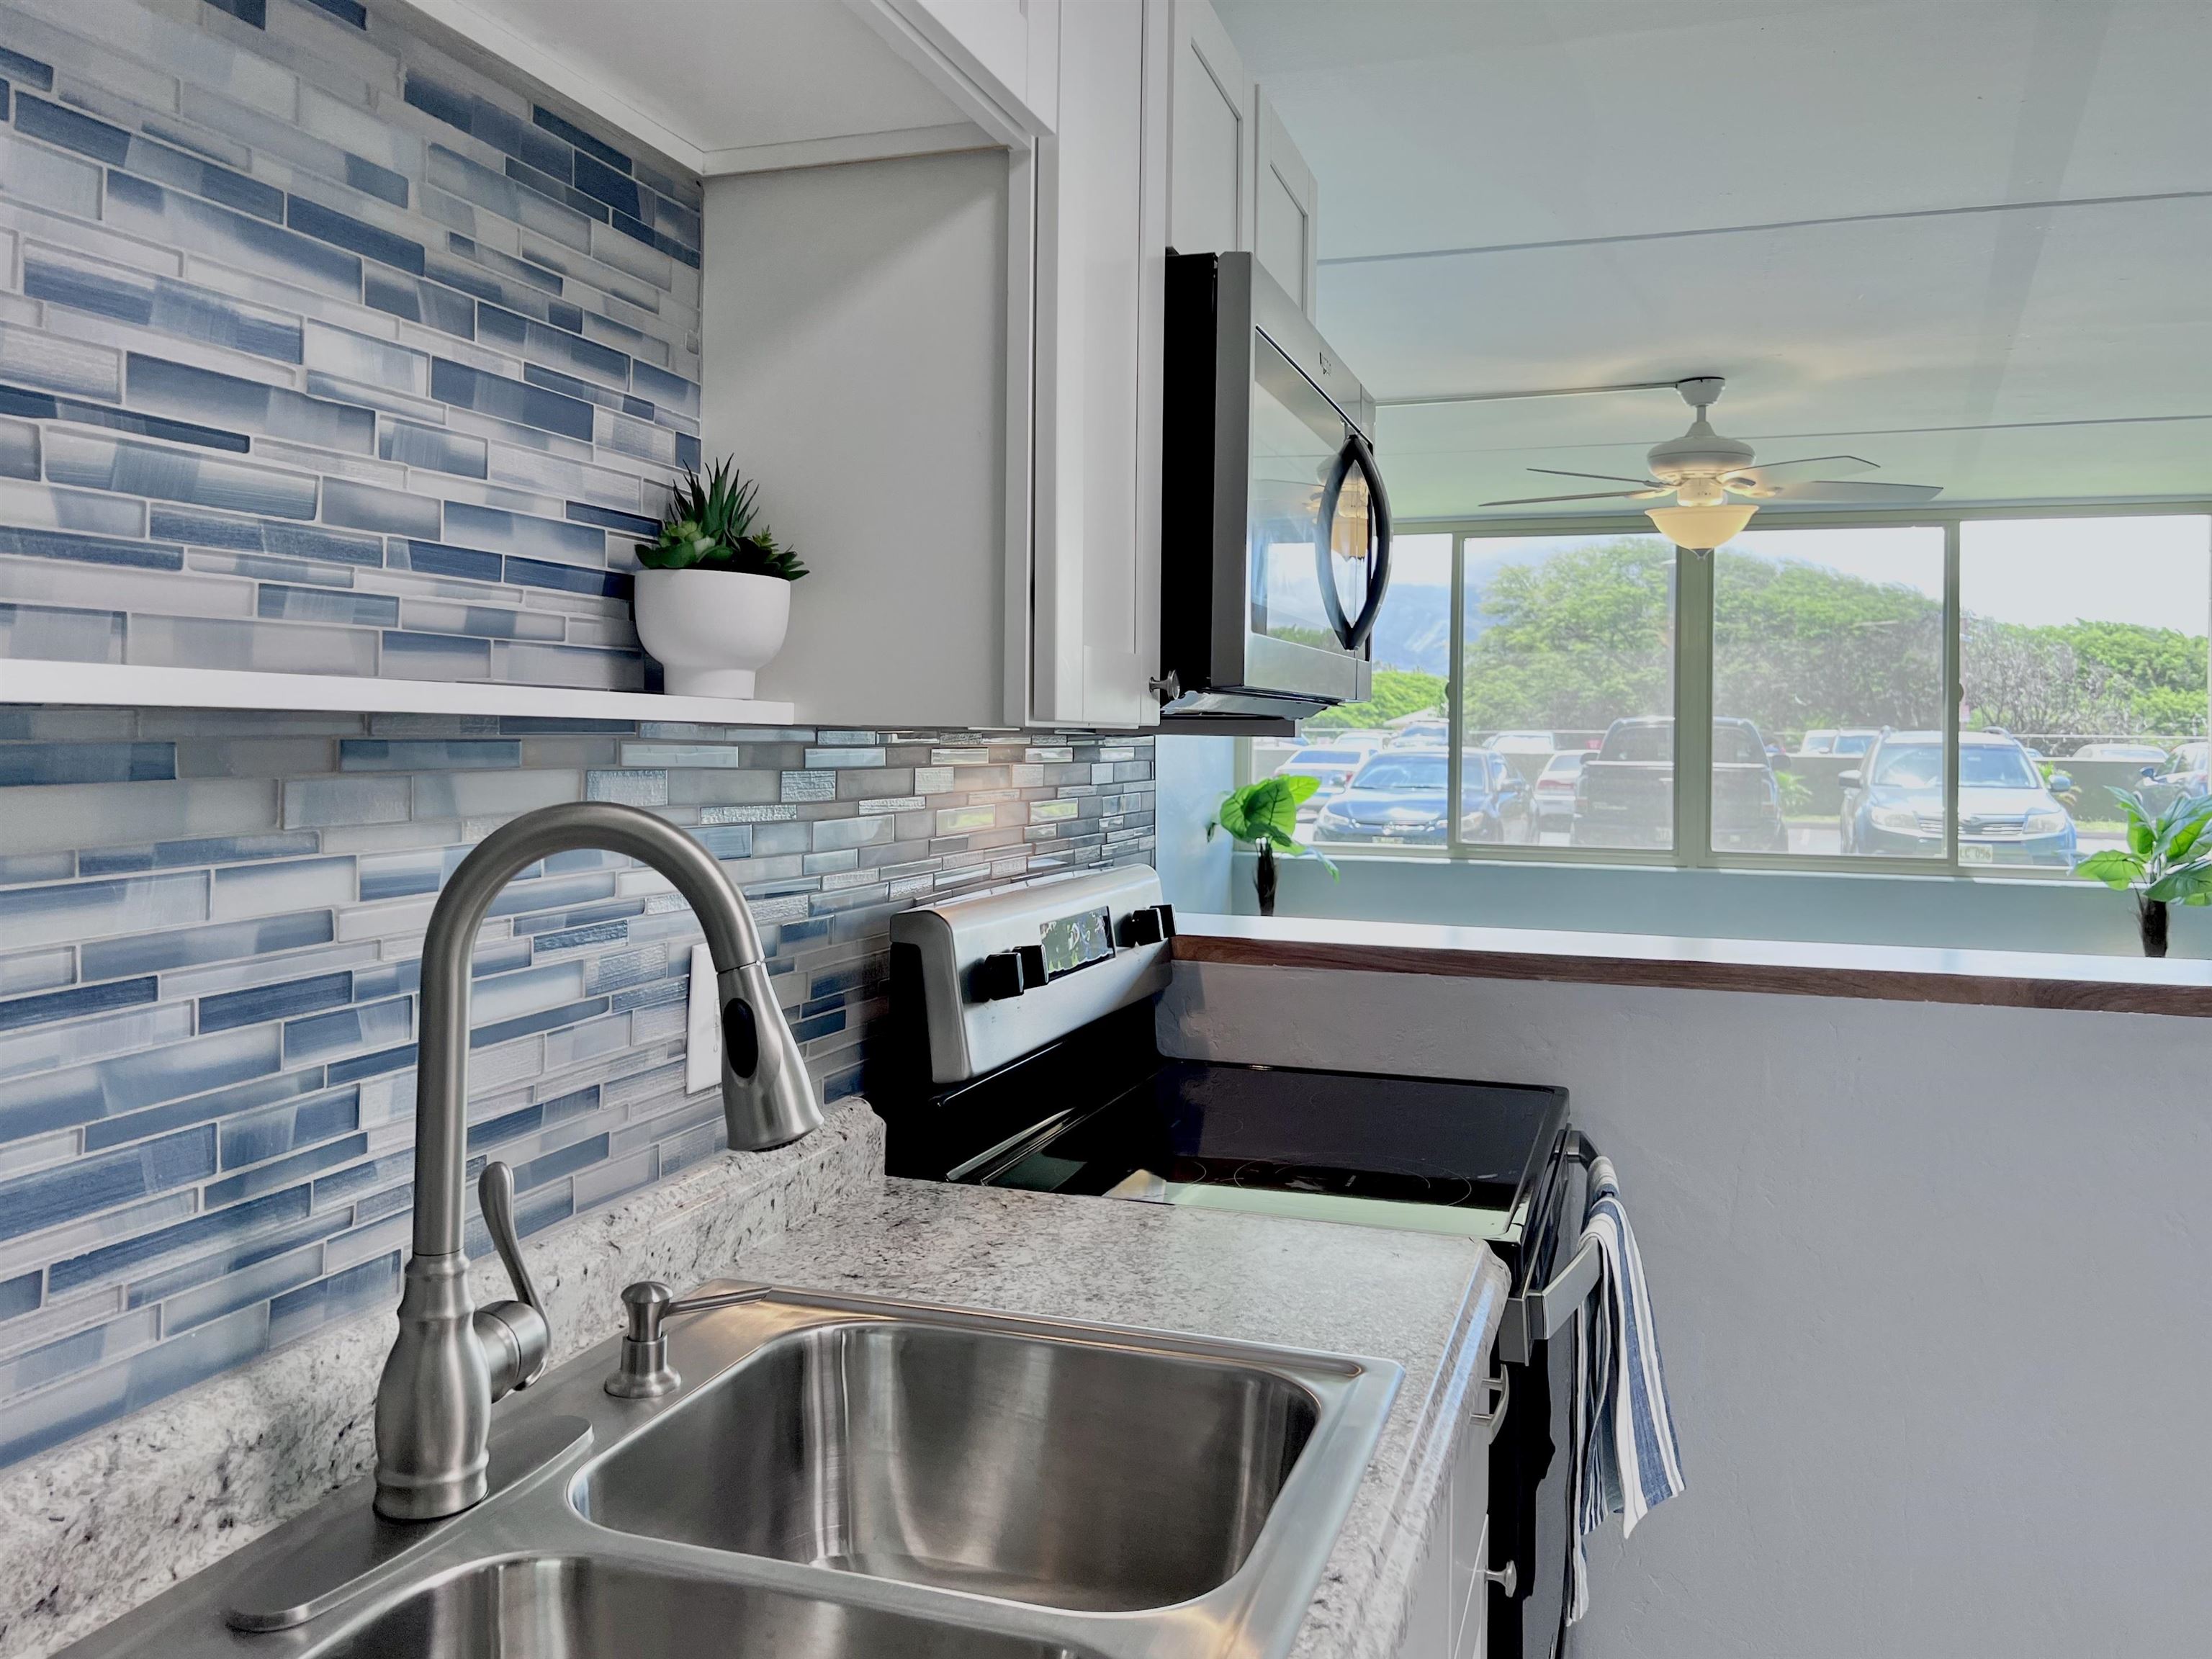 Gorgeous new tiled backsplash and formica countertops.